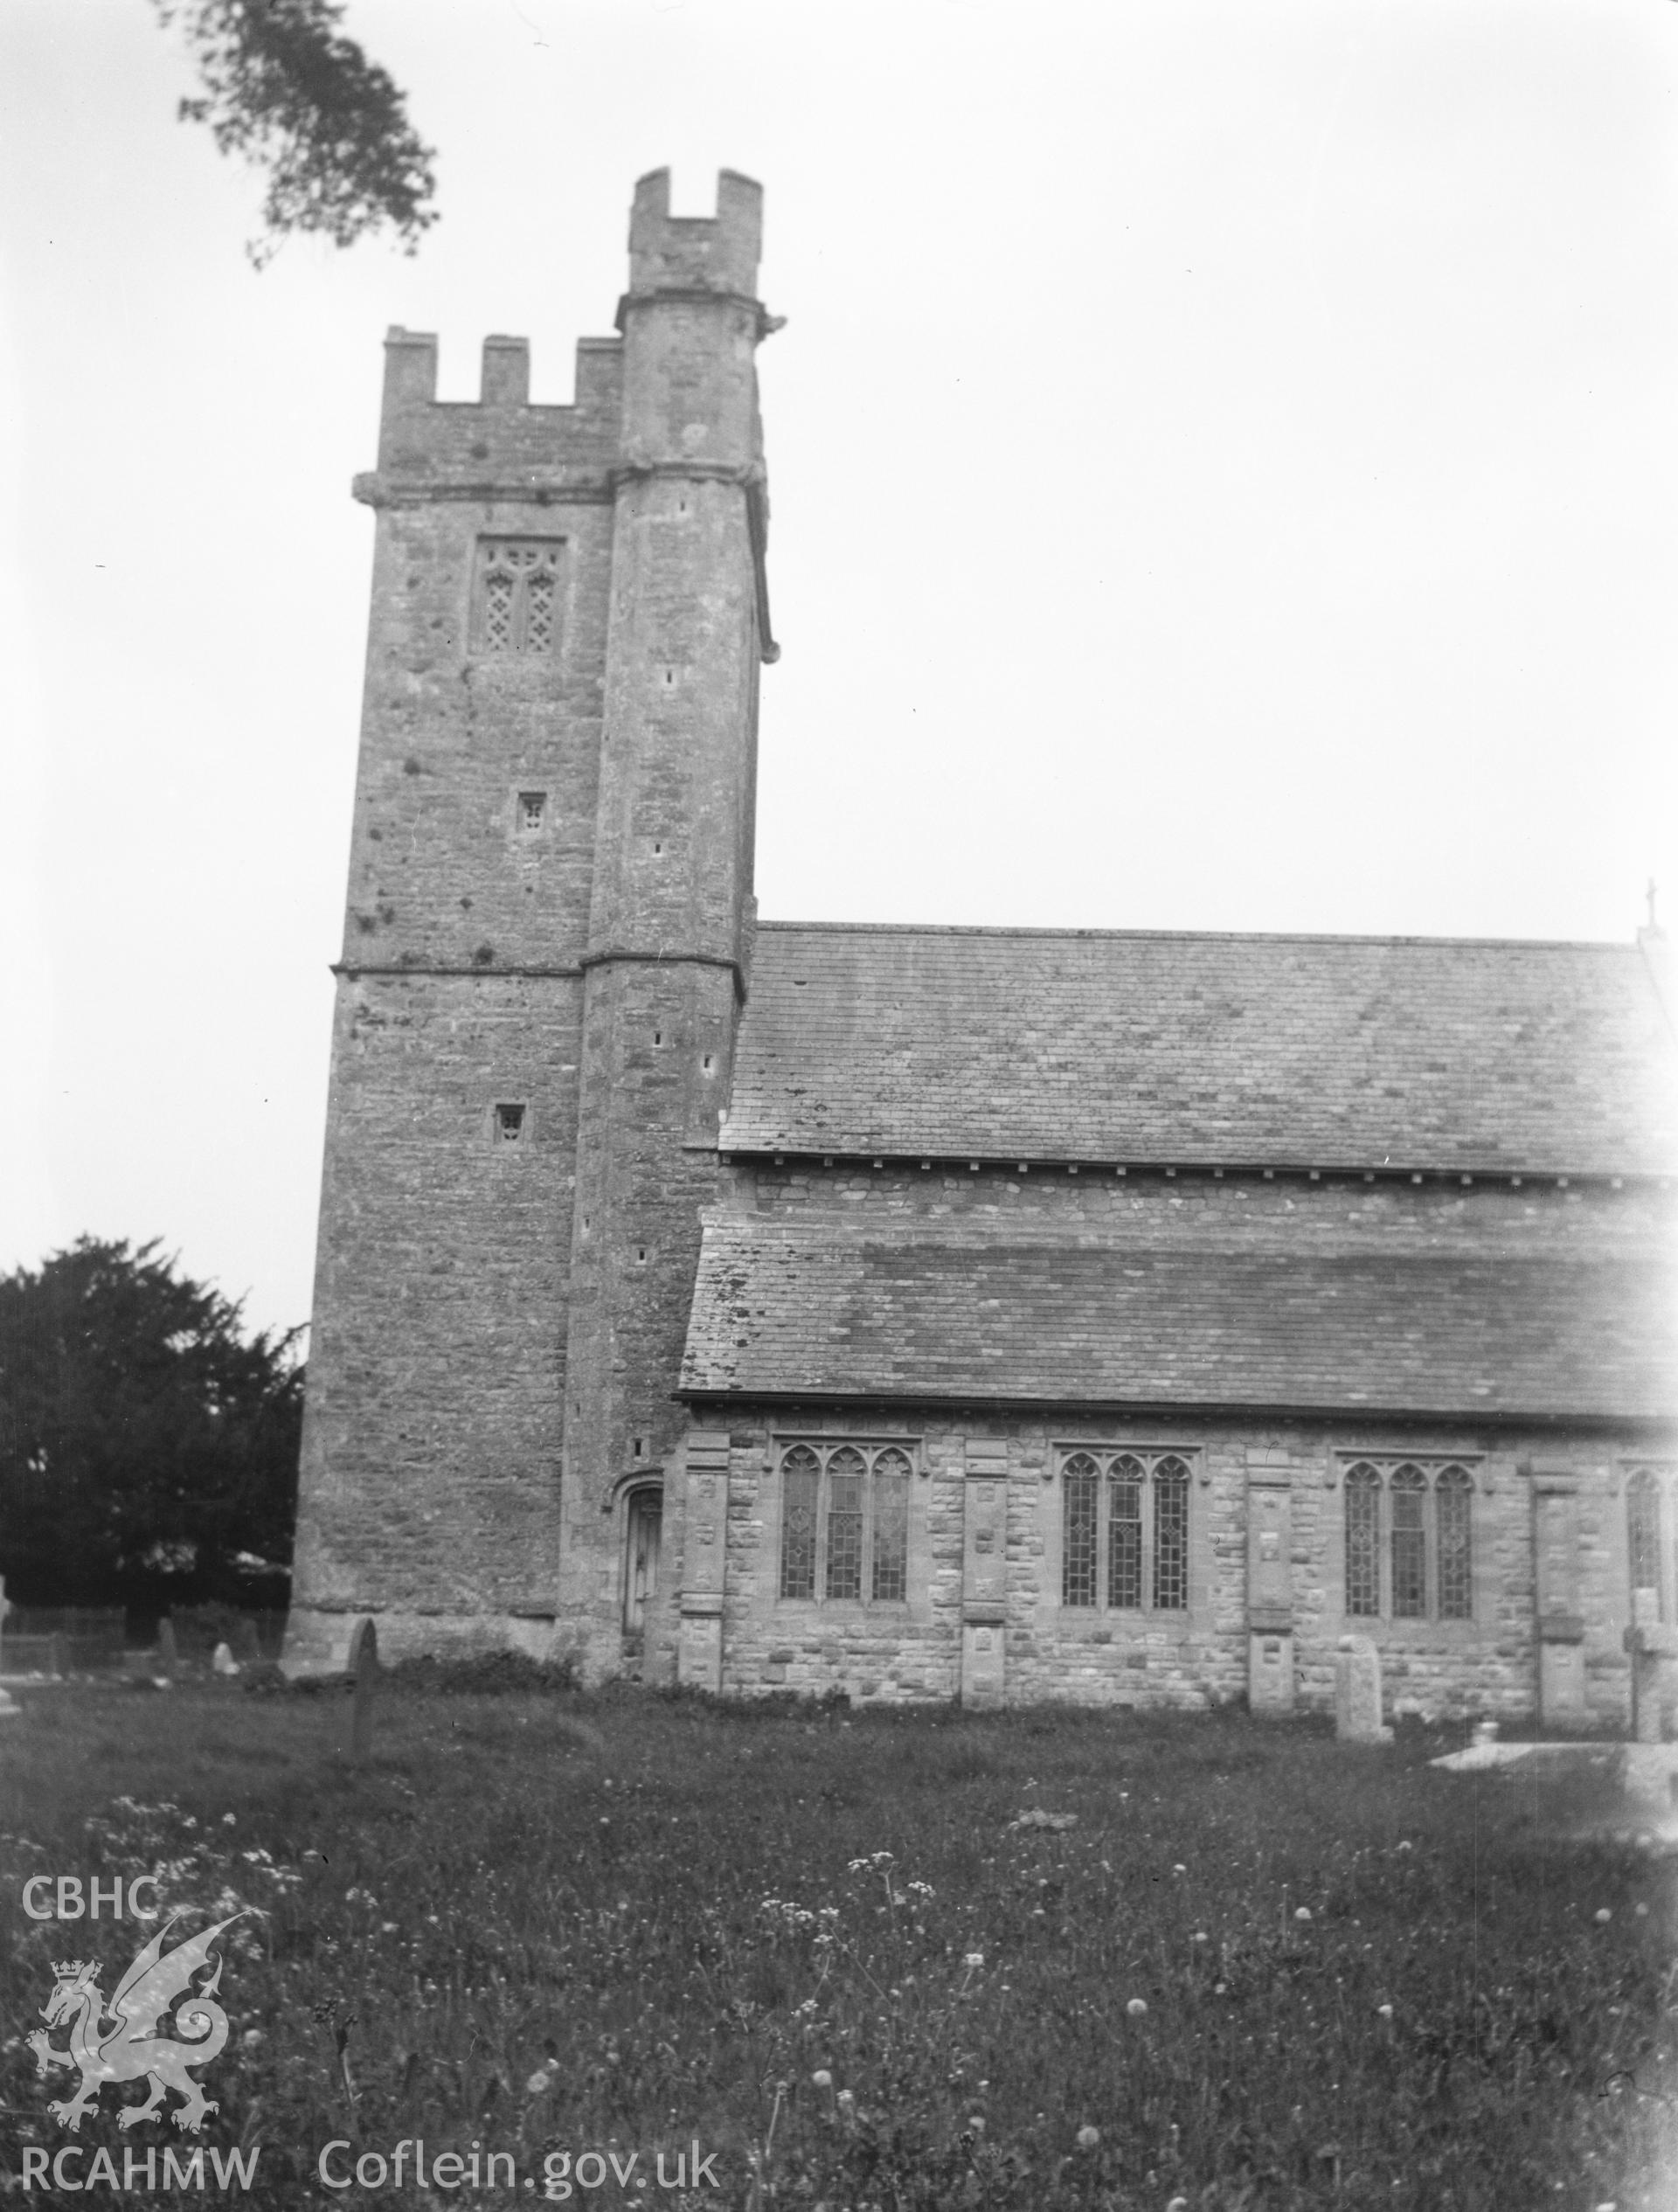 Digital copy of a nitrate negative showing exterior view of tower of St Stephen's Church, Caerwent. From the National Building Record Postcard Collection.